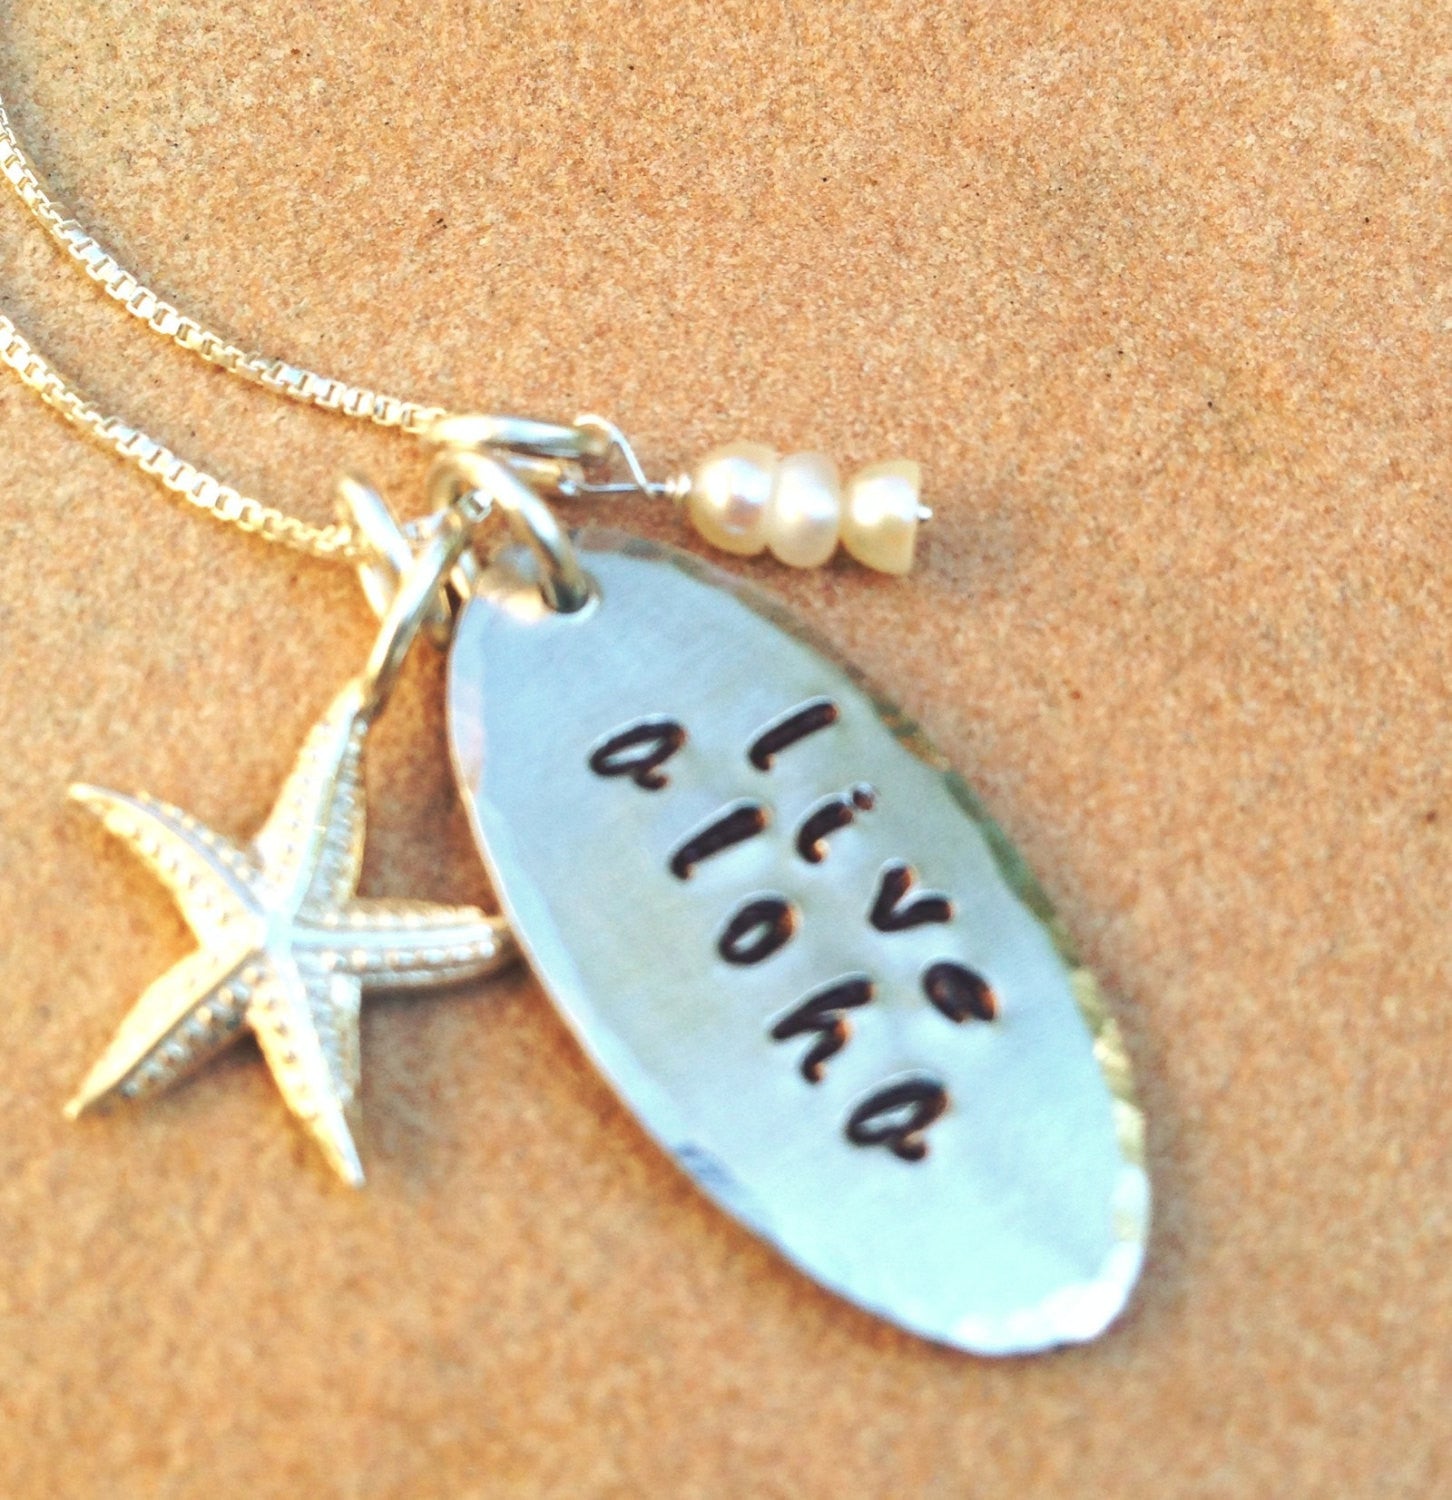 Live Aloha Necklace, Hawaiian necklace by Natashaaloha - Natashaaloha, jewelry, bracelets, necklace, keychains, fishing lures, gifts for men, charms, personalized, 